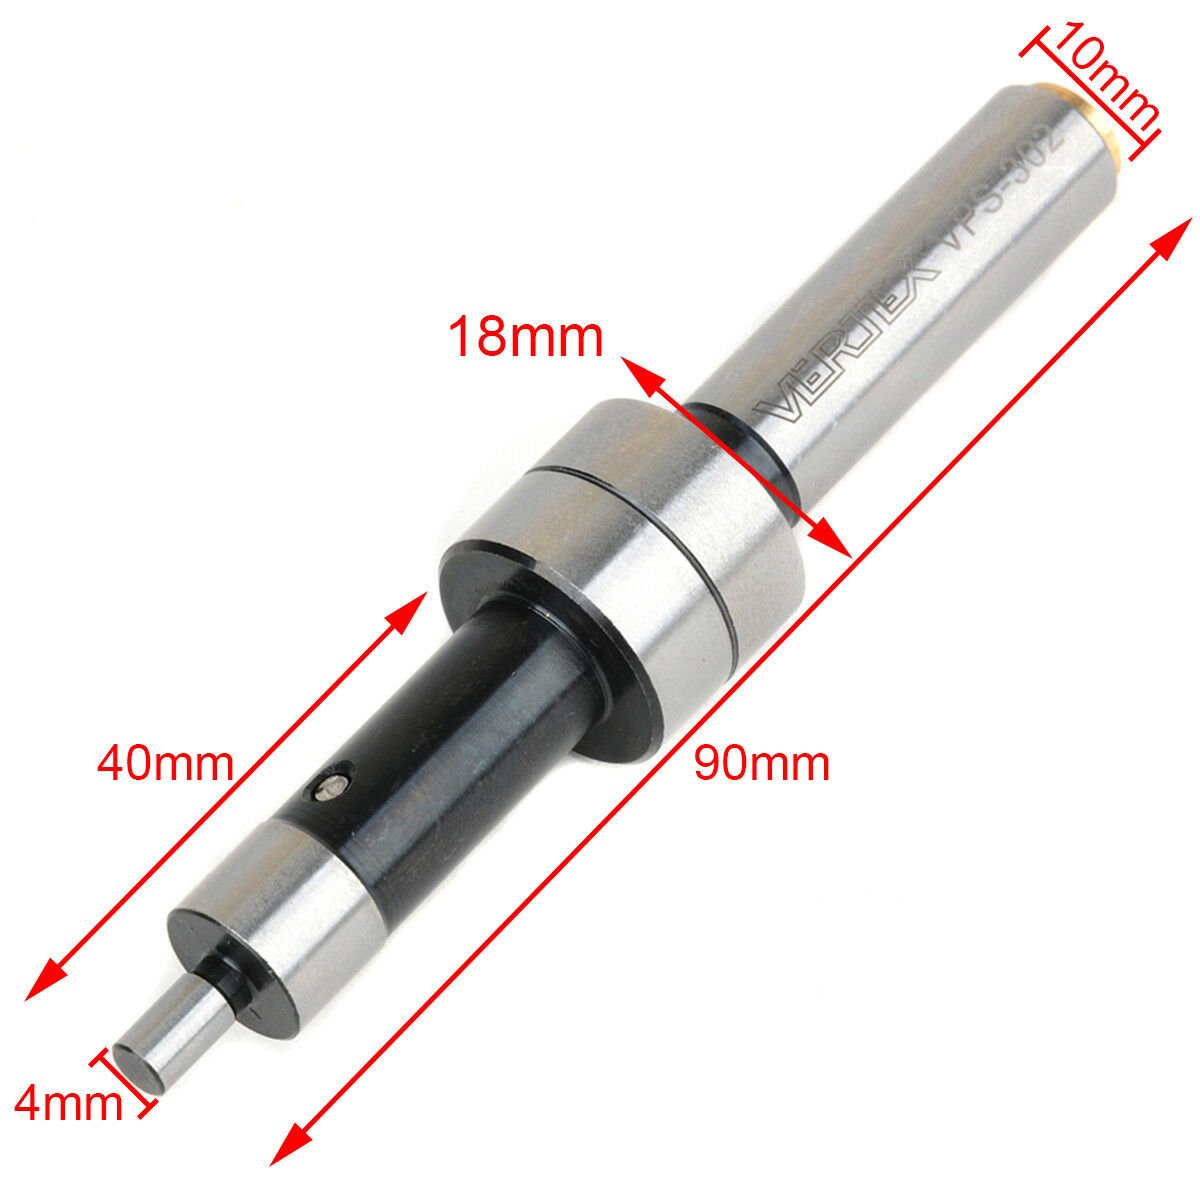 CE-420 Machine Tool Edge Finder Speed Shank 10mm Tip 4mm For CNC ...